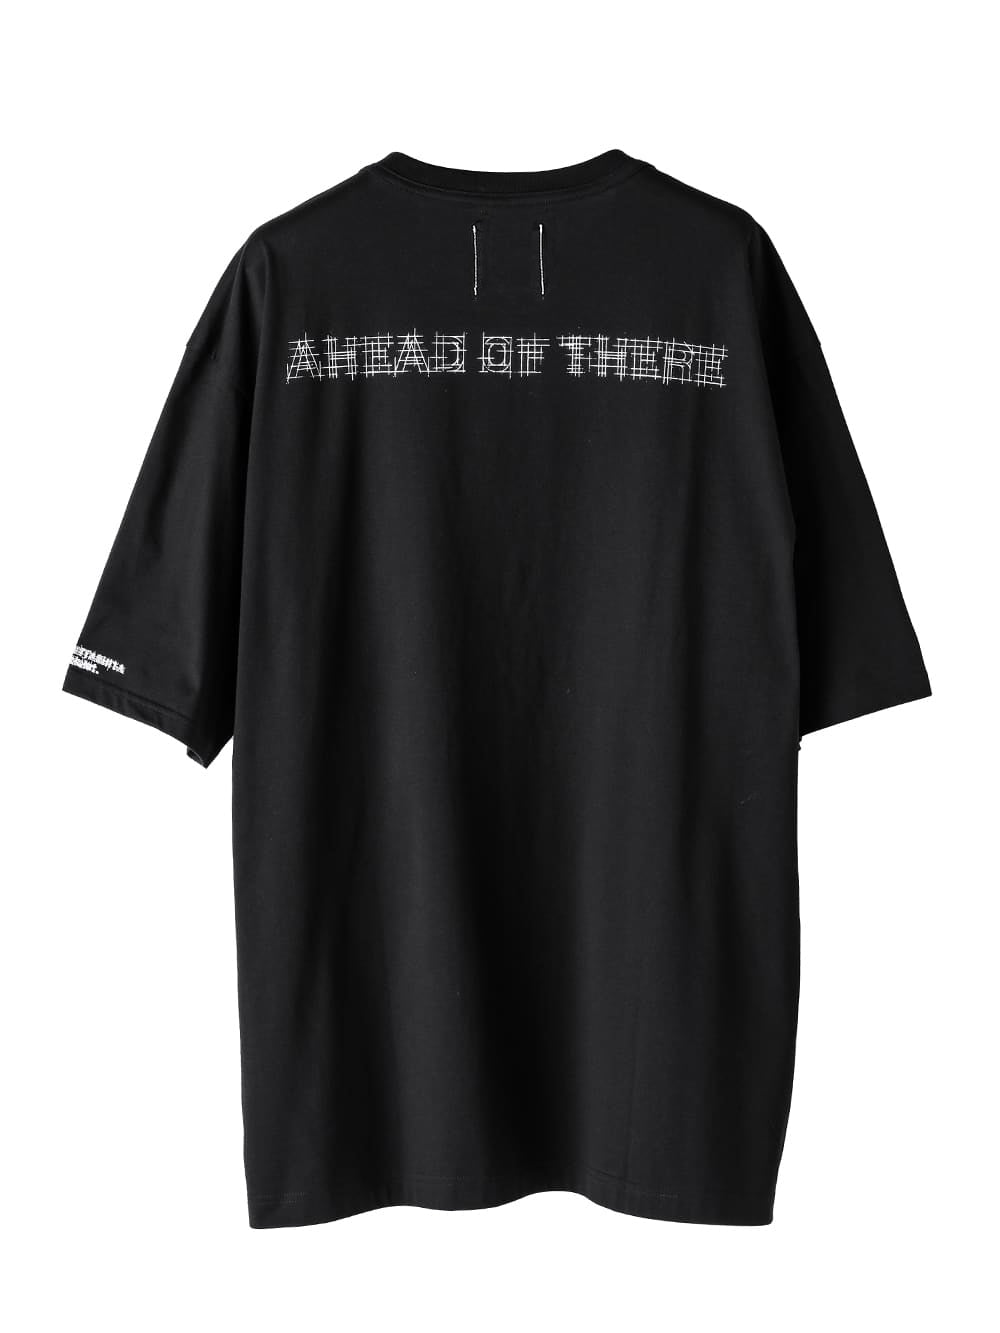 Ahead of there. (oversized s/s pocket tee)